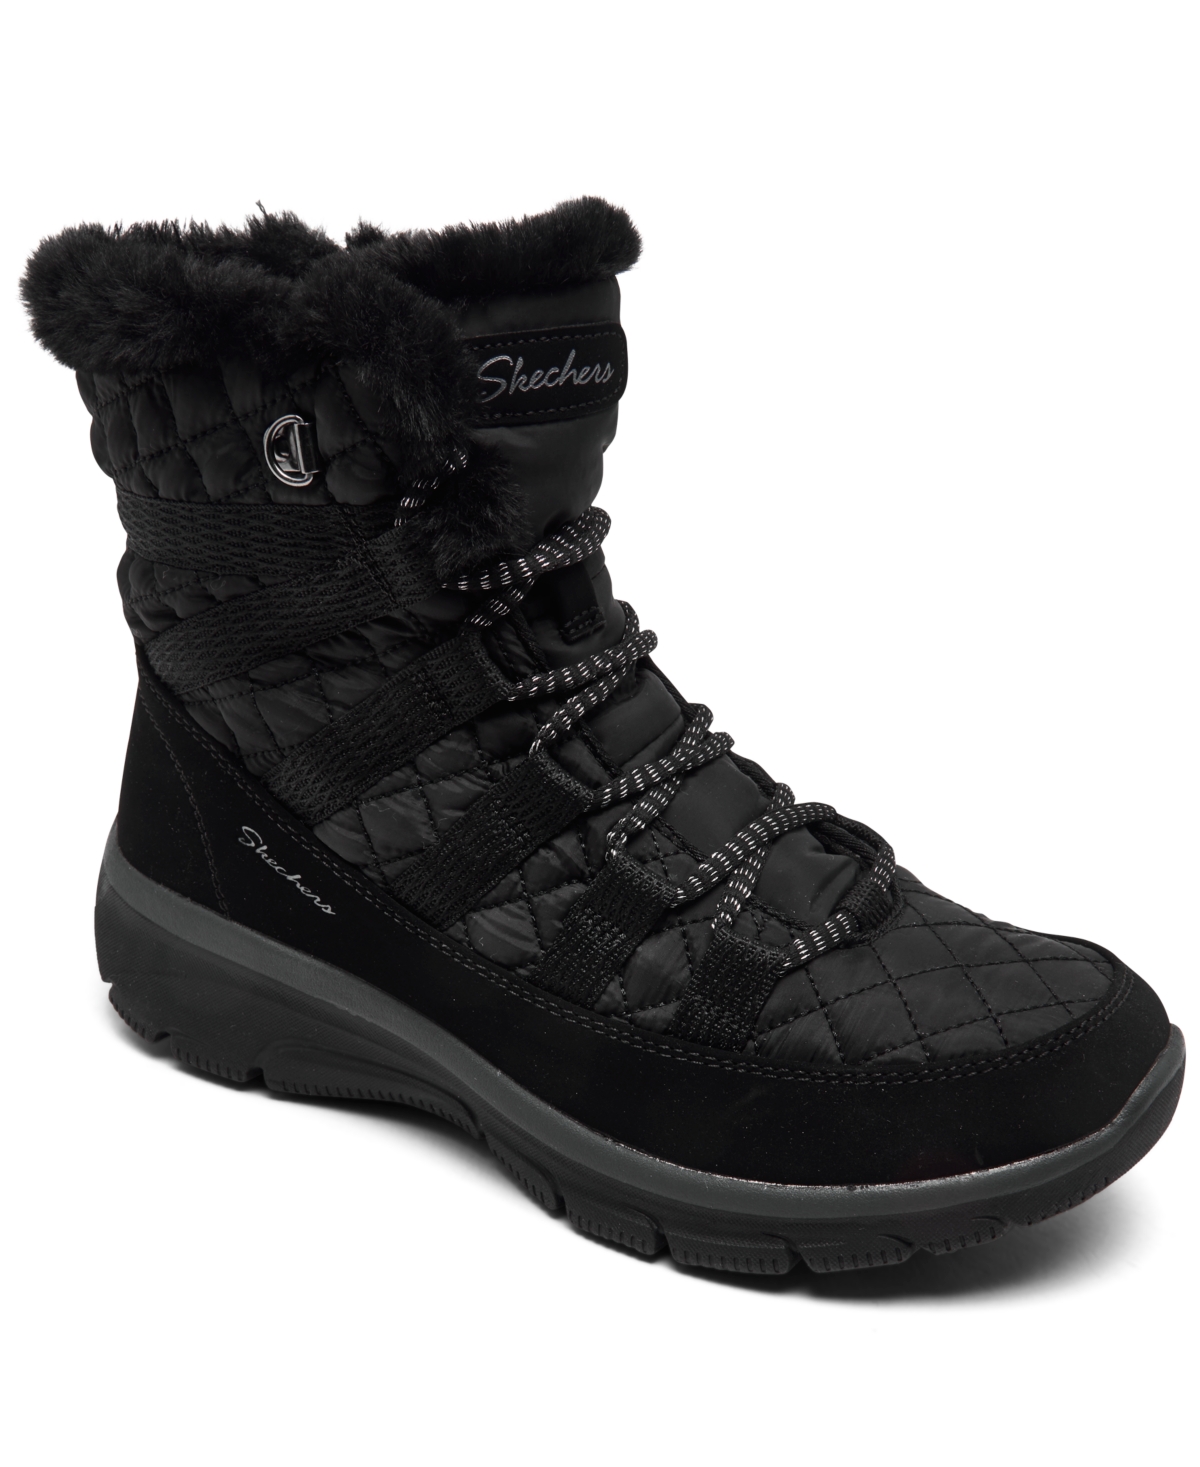 Women's Relaxed Fit Easy Going - Moro Rock Boots from Finish Line - Black